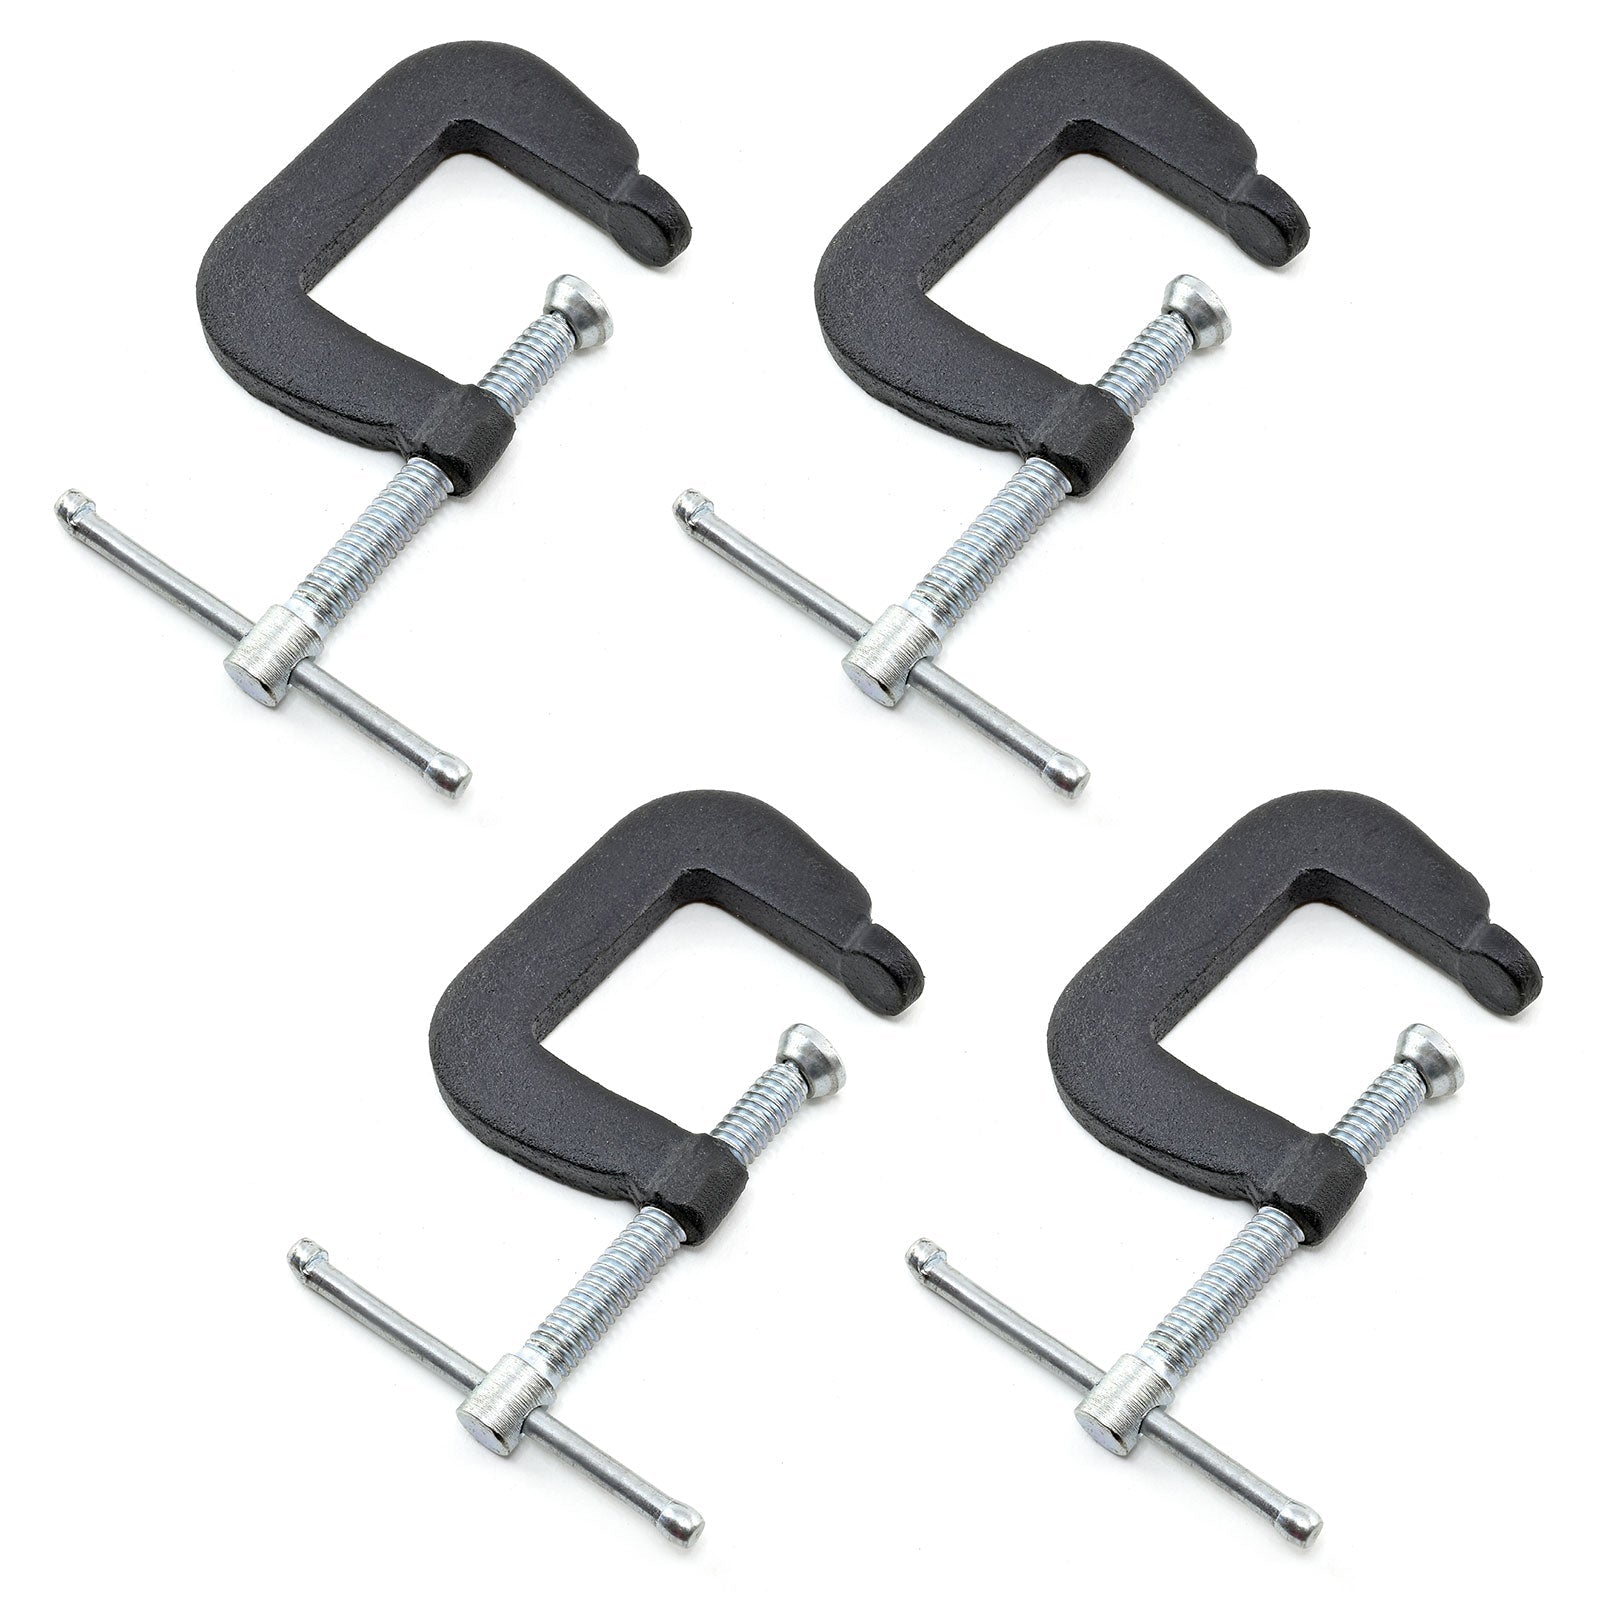 1" x 1" Miniature Forged Steel C-clamp, Set of 4